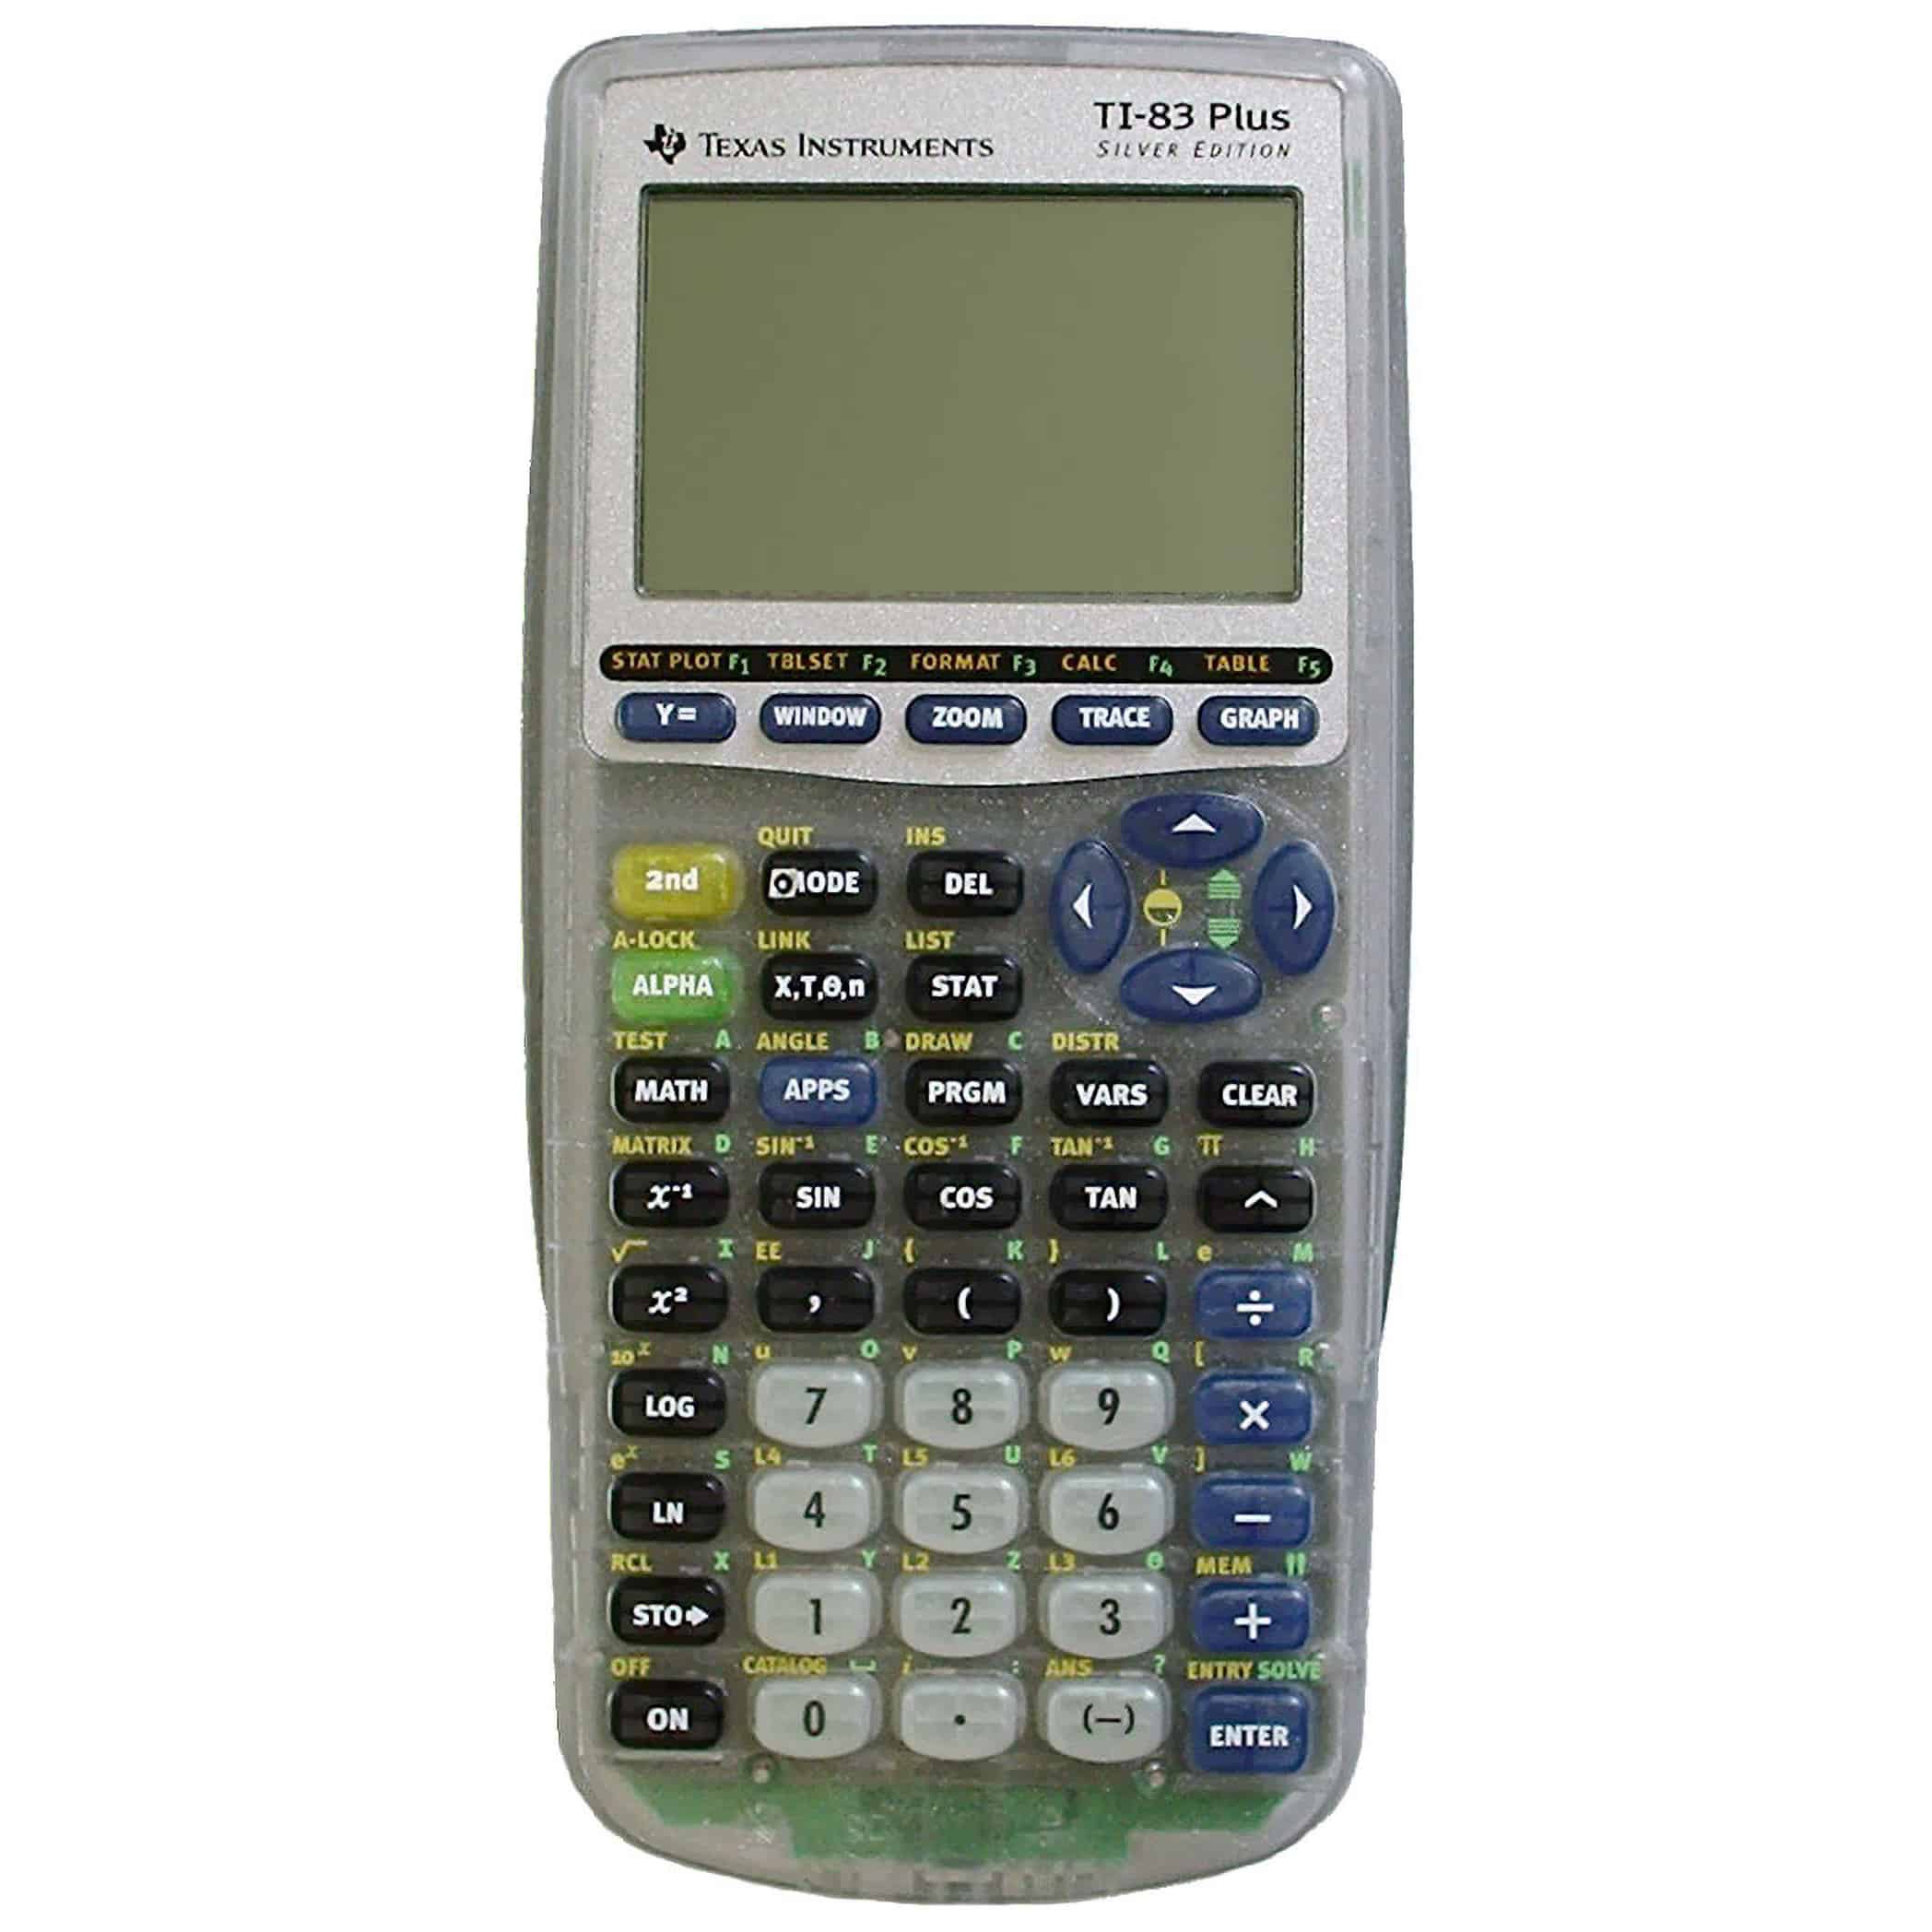 Details about   Texas Instruments TI-83 Plus Silver Edition Graphing Calculator w/ Slide Cover